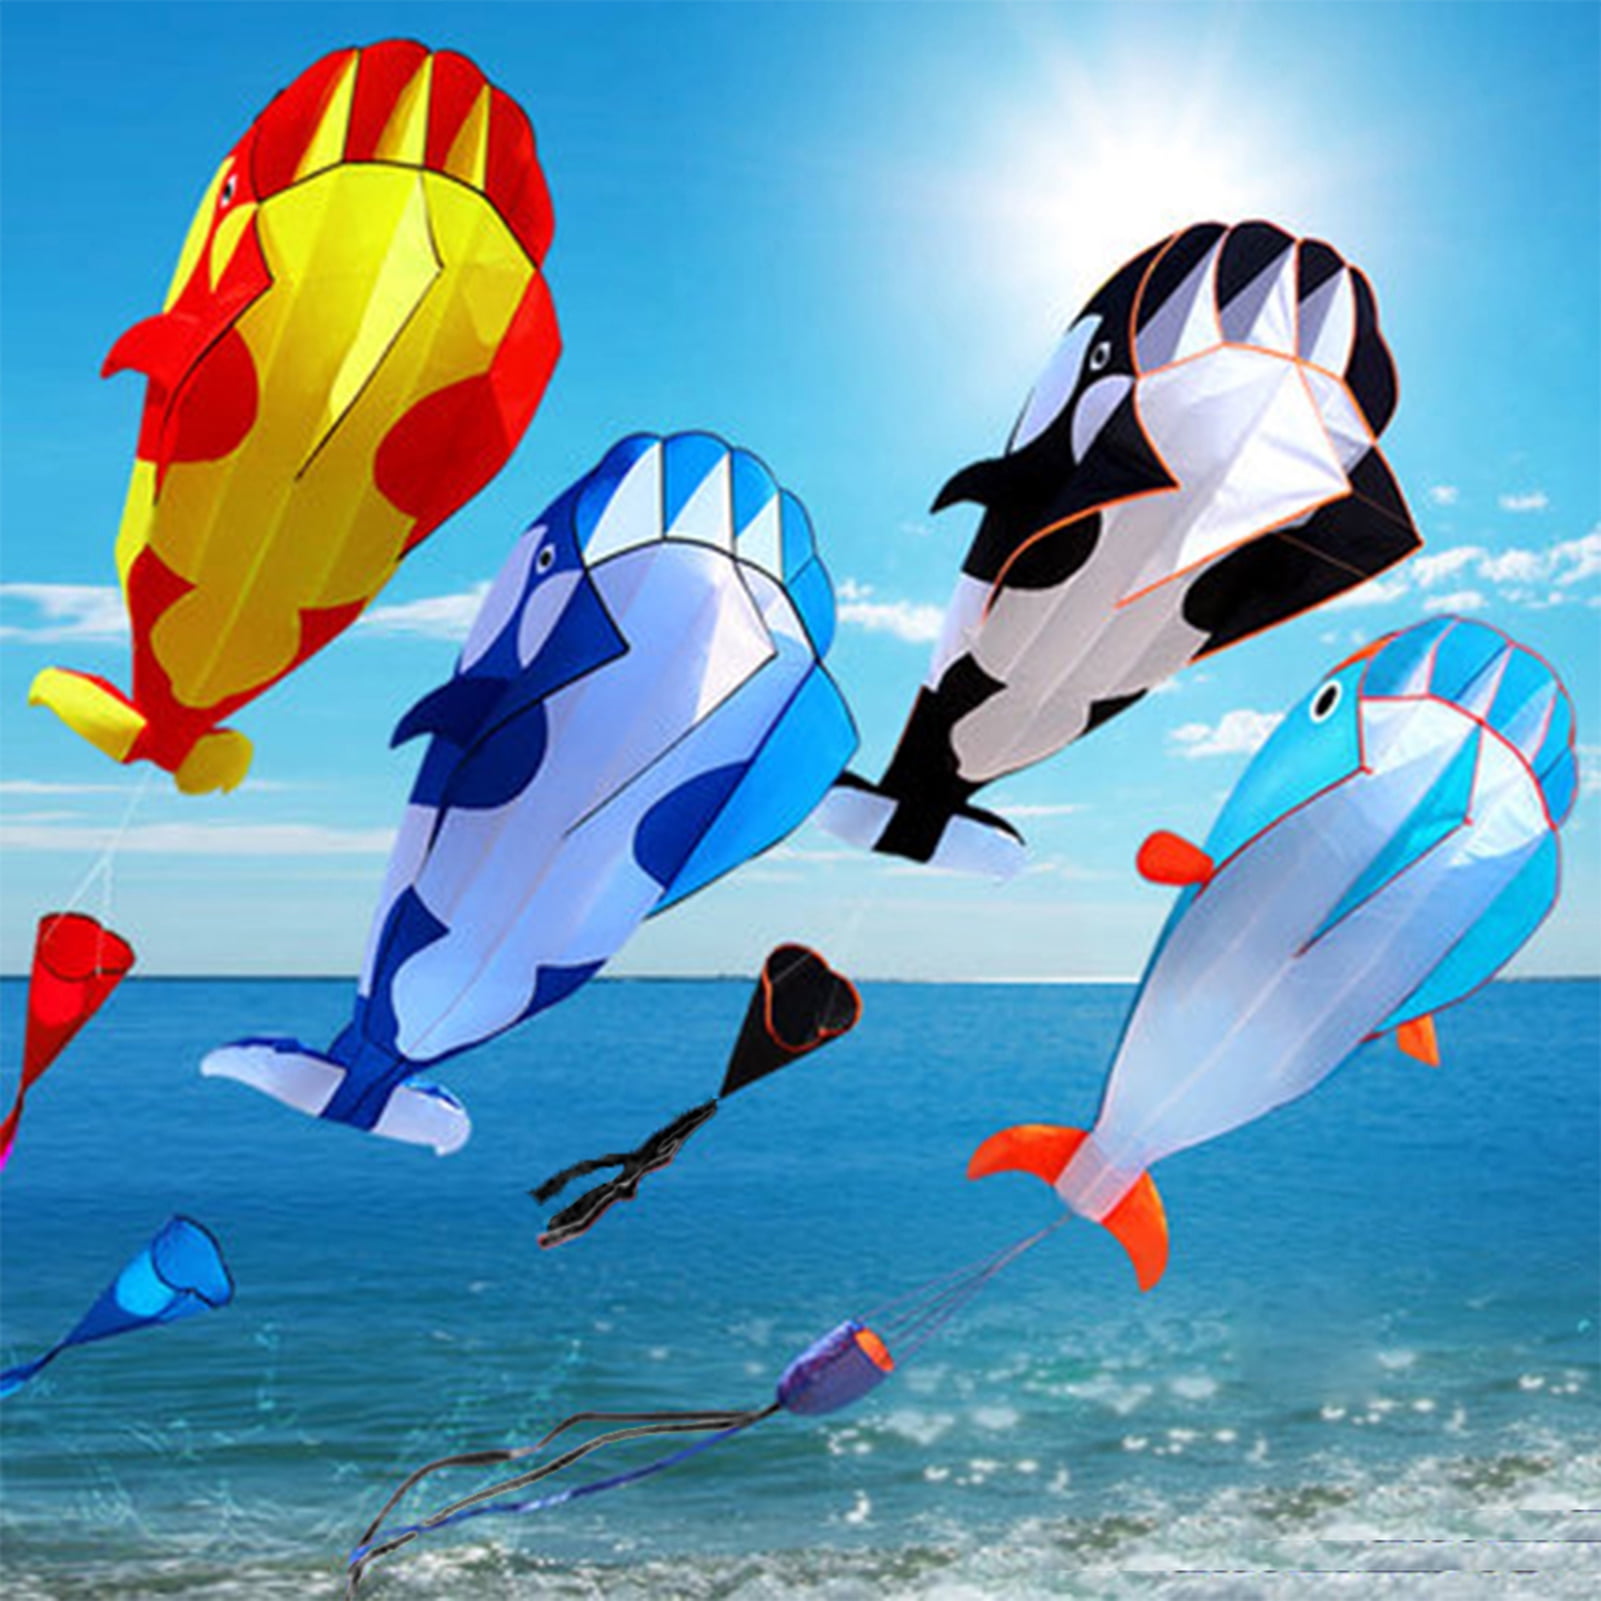 Welling 3D Soft Whale Frameless Flying Kite Outdoor Sports Toy Children  Kids Funny Gift 